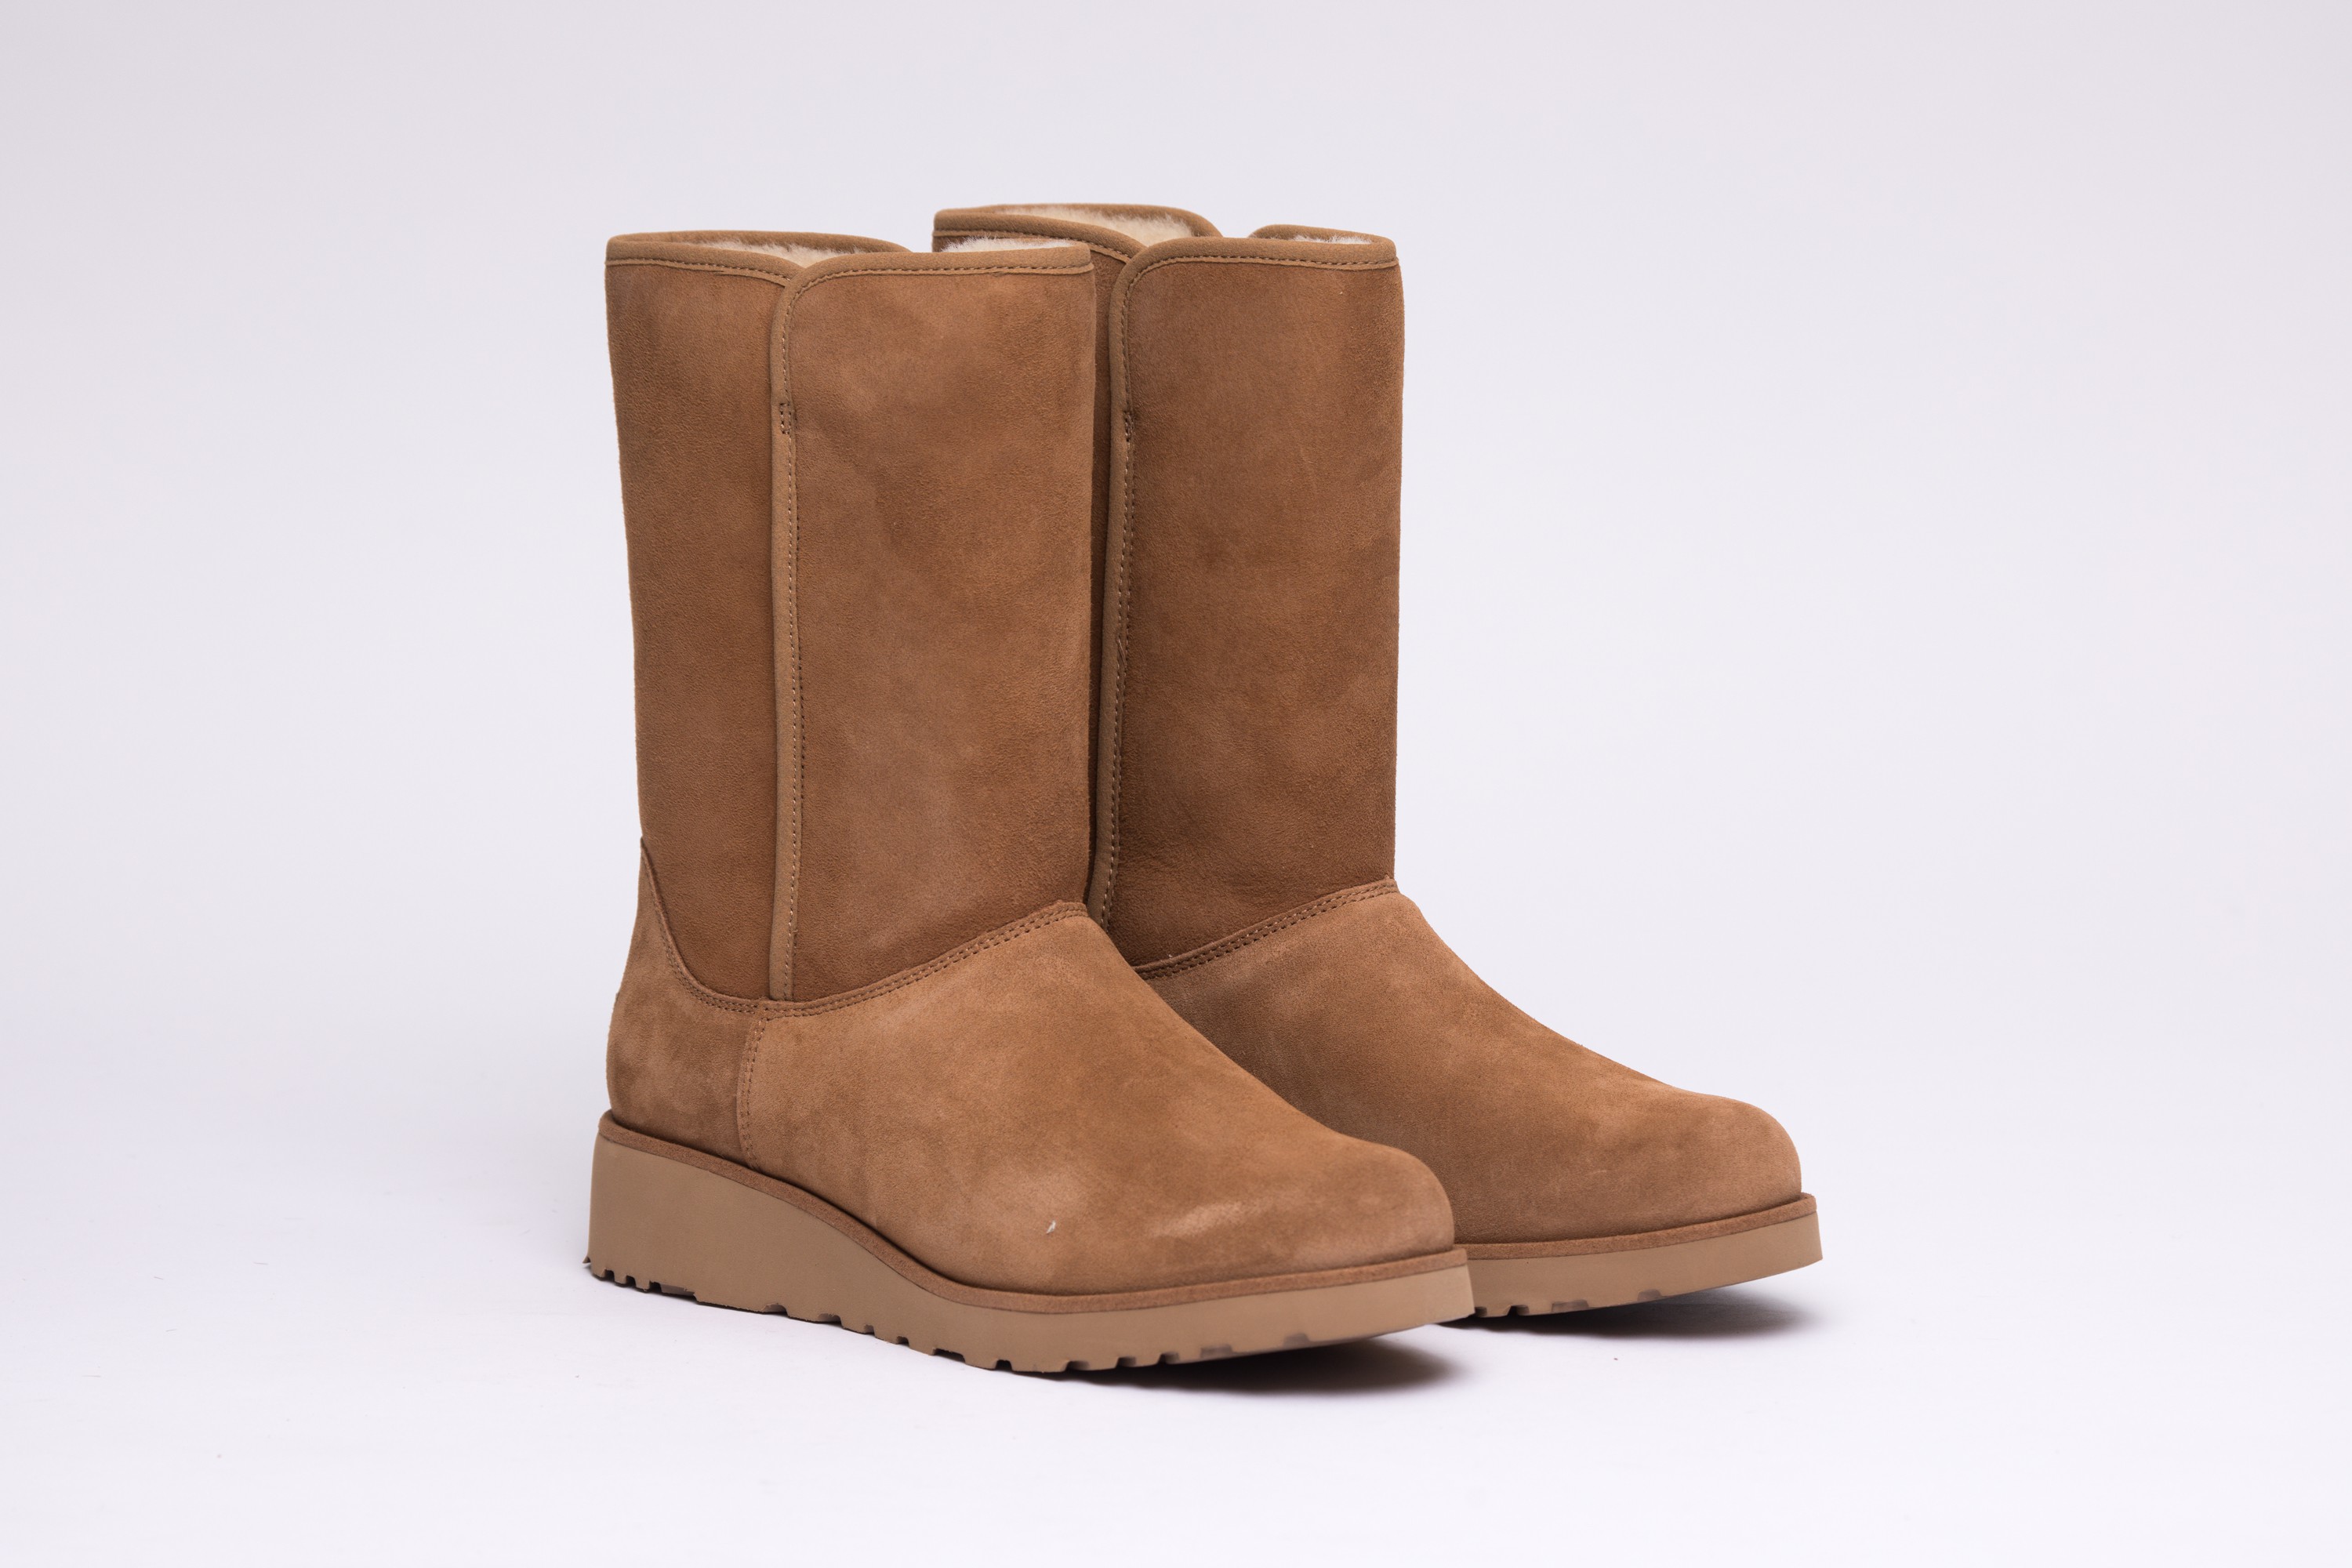 uggs amie boots on sale